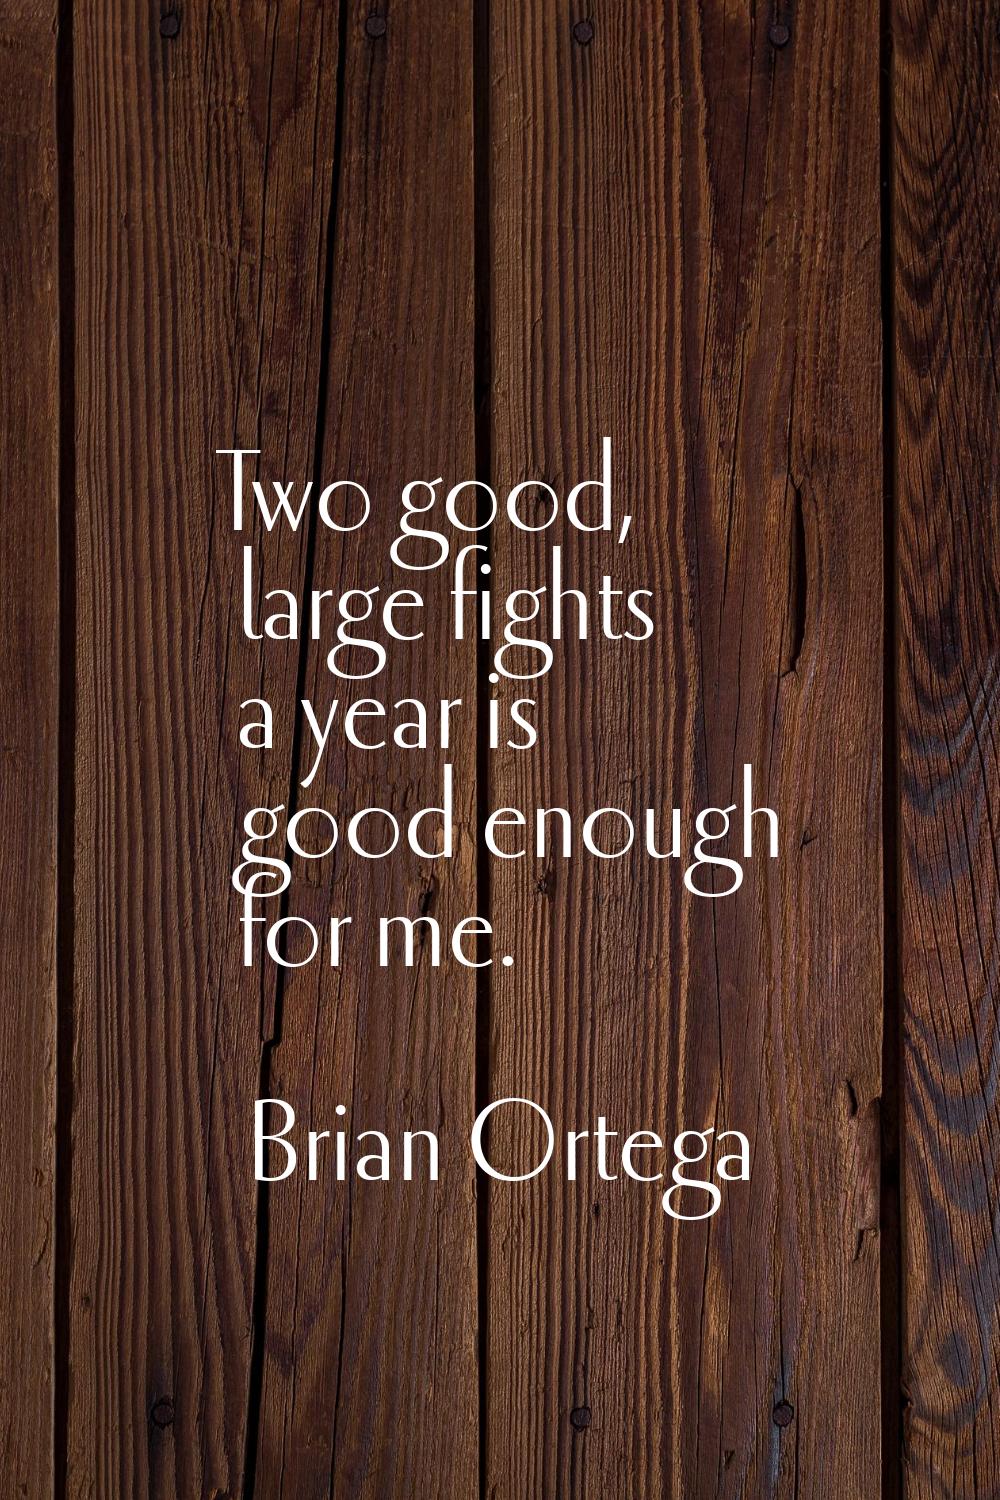 Two good, large fights a year is good enough for me.